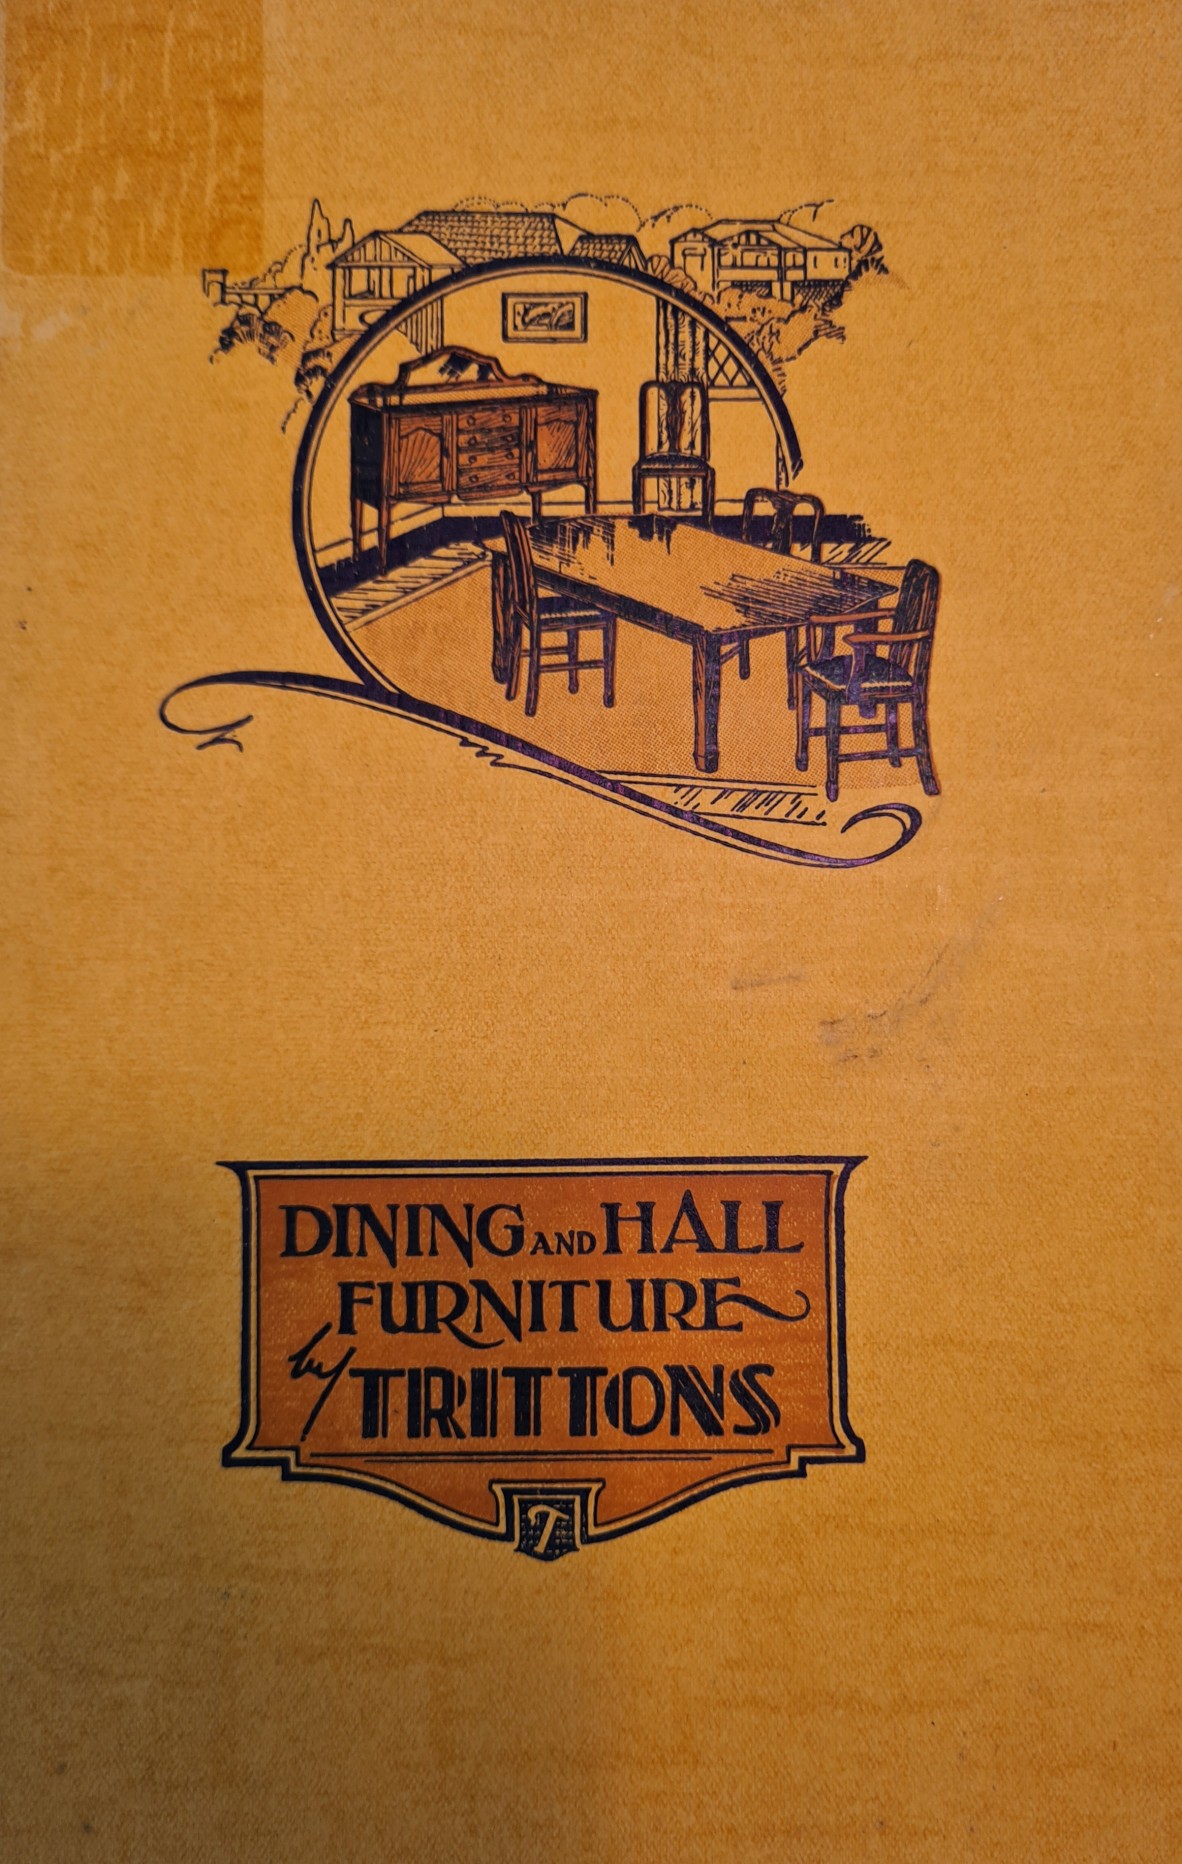 Trittons Dining and Hall Furniture 1930s.